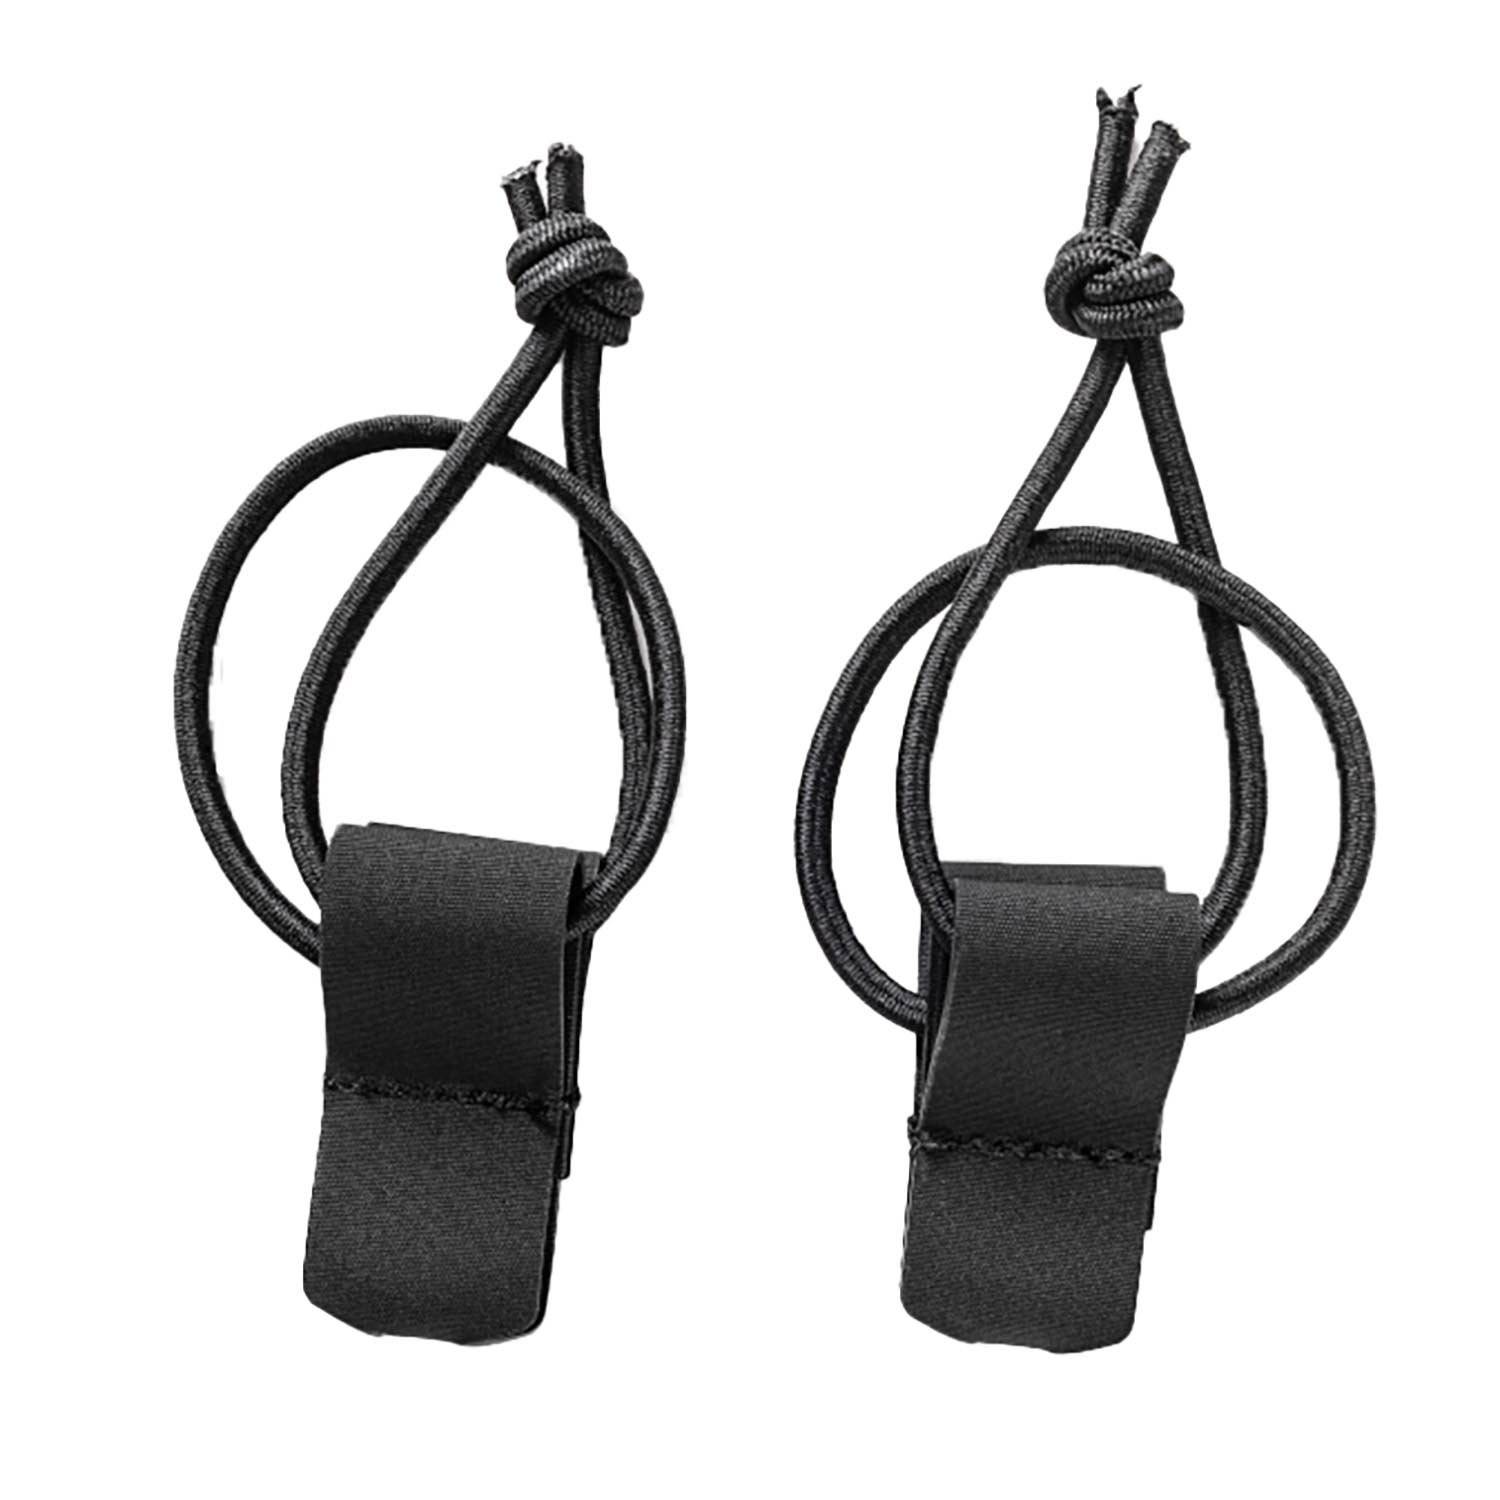 5.11 TACTICAL POUCH BUNGEE KIT